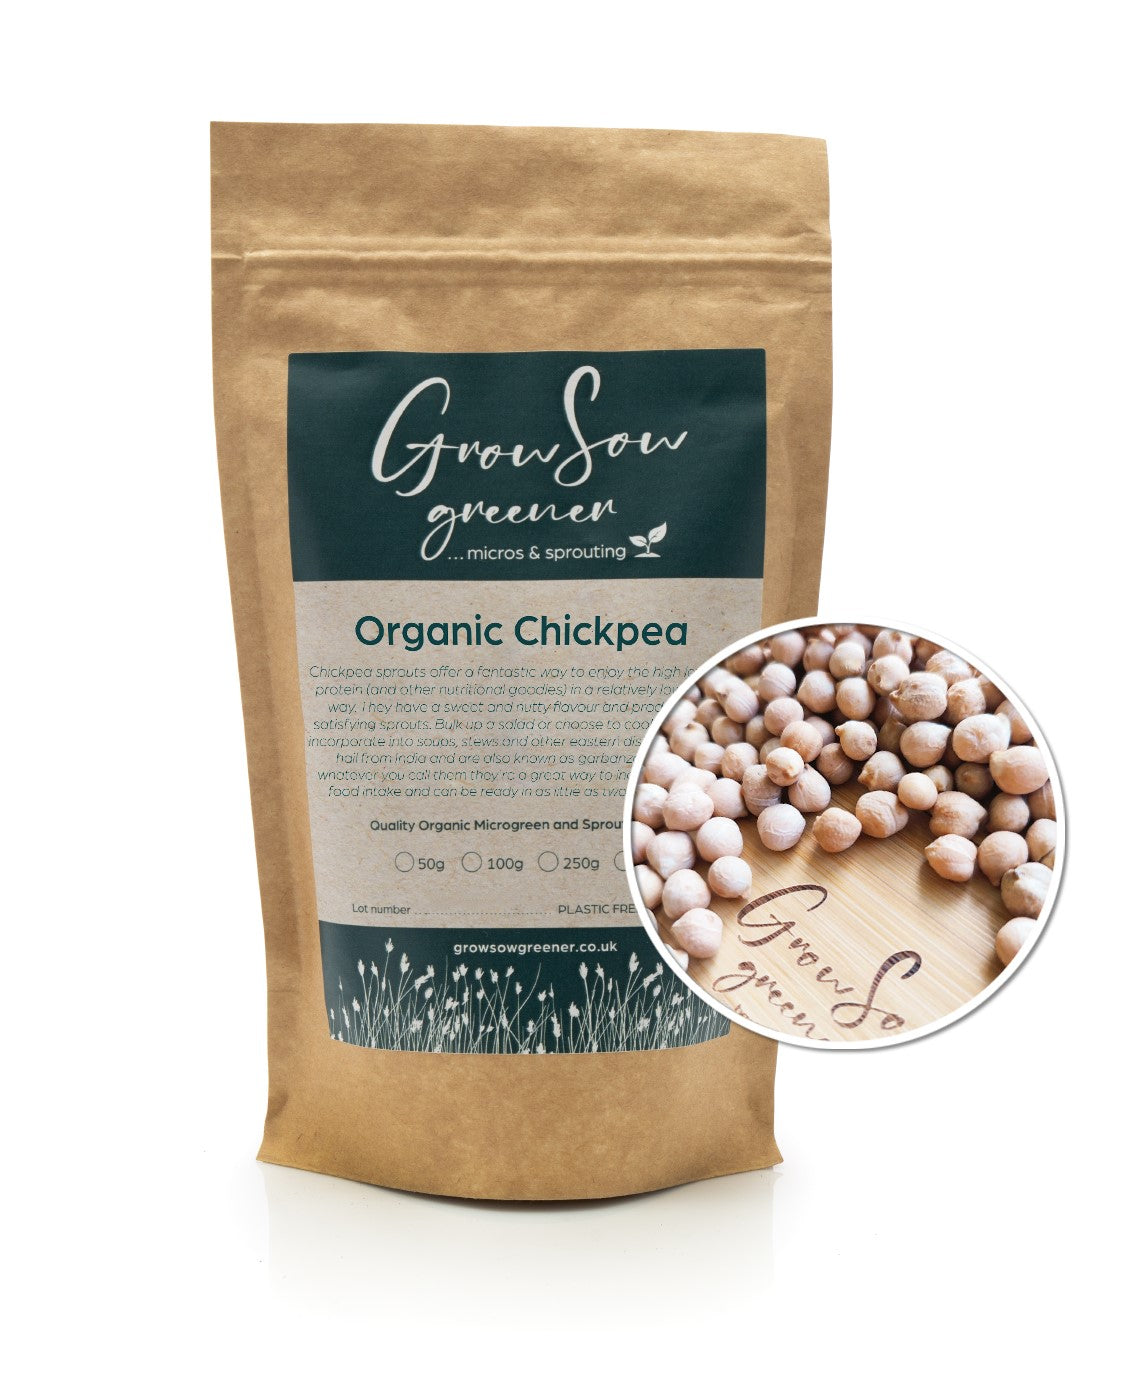 Chickpea seeds organic non-gmo pre-soaked for reduced phytic acid